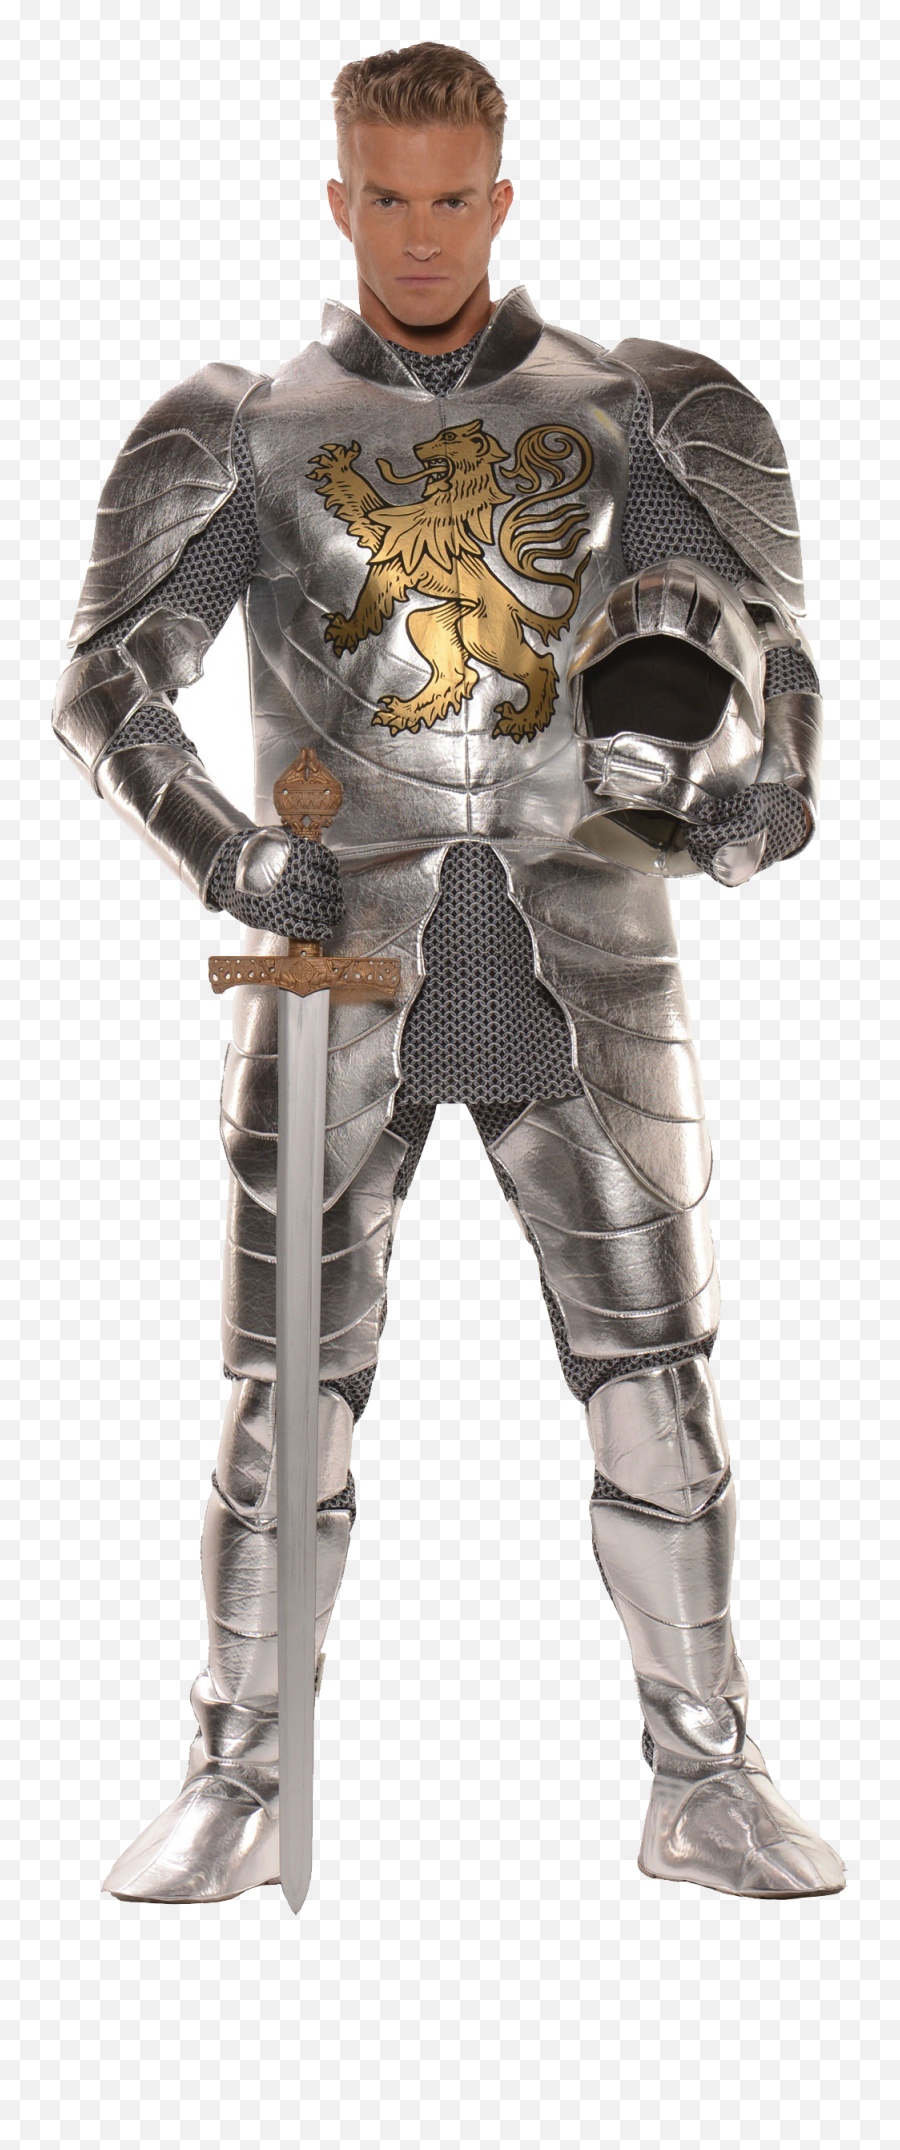 Medival Knight In Png - Knight In Shining Armor Costume,Knight Transparent Background